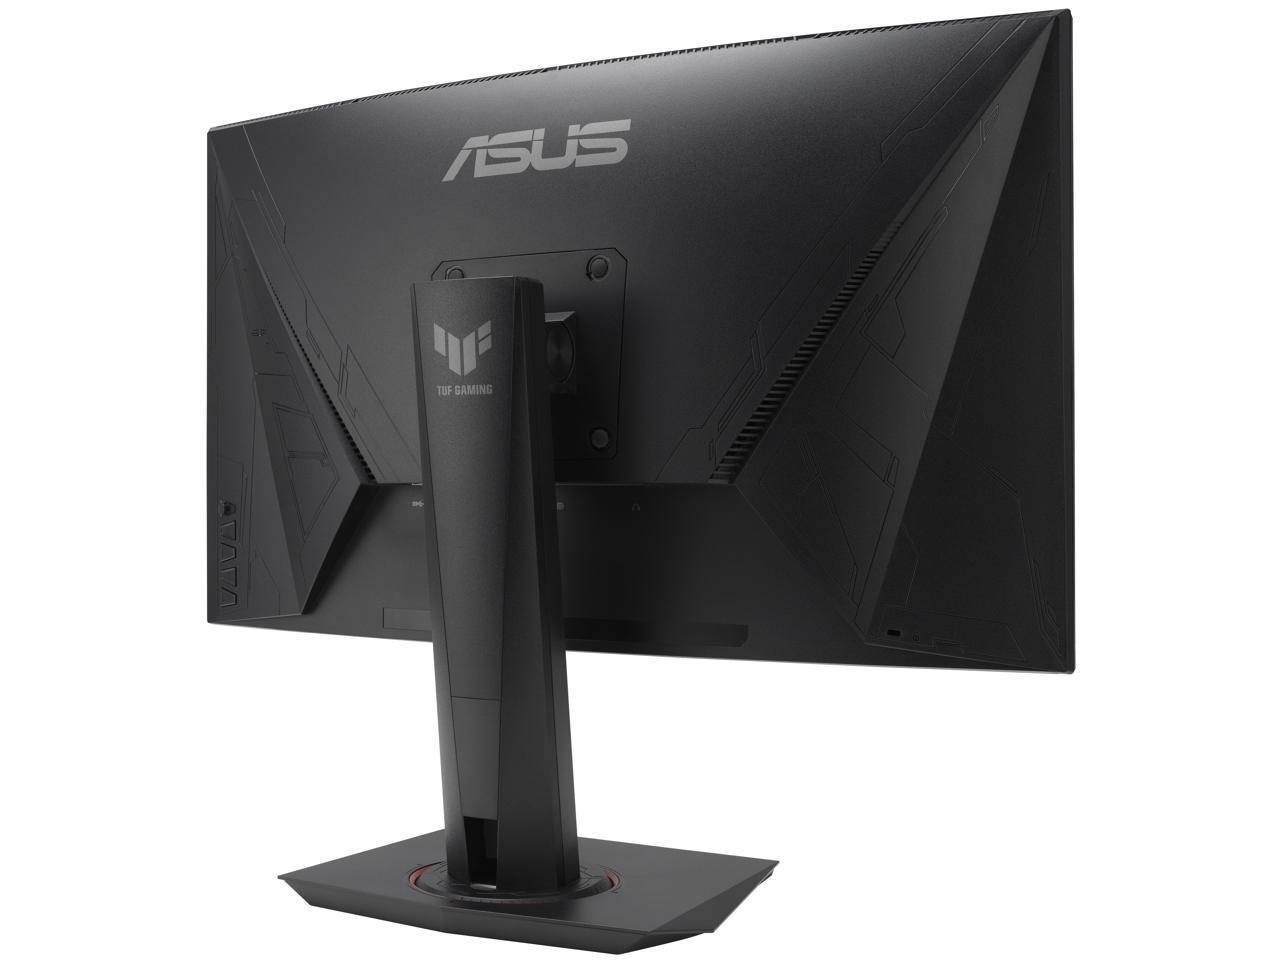 ASUS 27" 1080P TUF Gaming Curved HDR Monitor (VG27VQM) - Full HD, 240Hz, 1ms, Extreme Low Motion Blur, Adaptive-Sync, FreeSync Premium, Speakers, Eye Care, HDMI, DisplayPort, USB, Height Adjustable